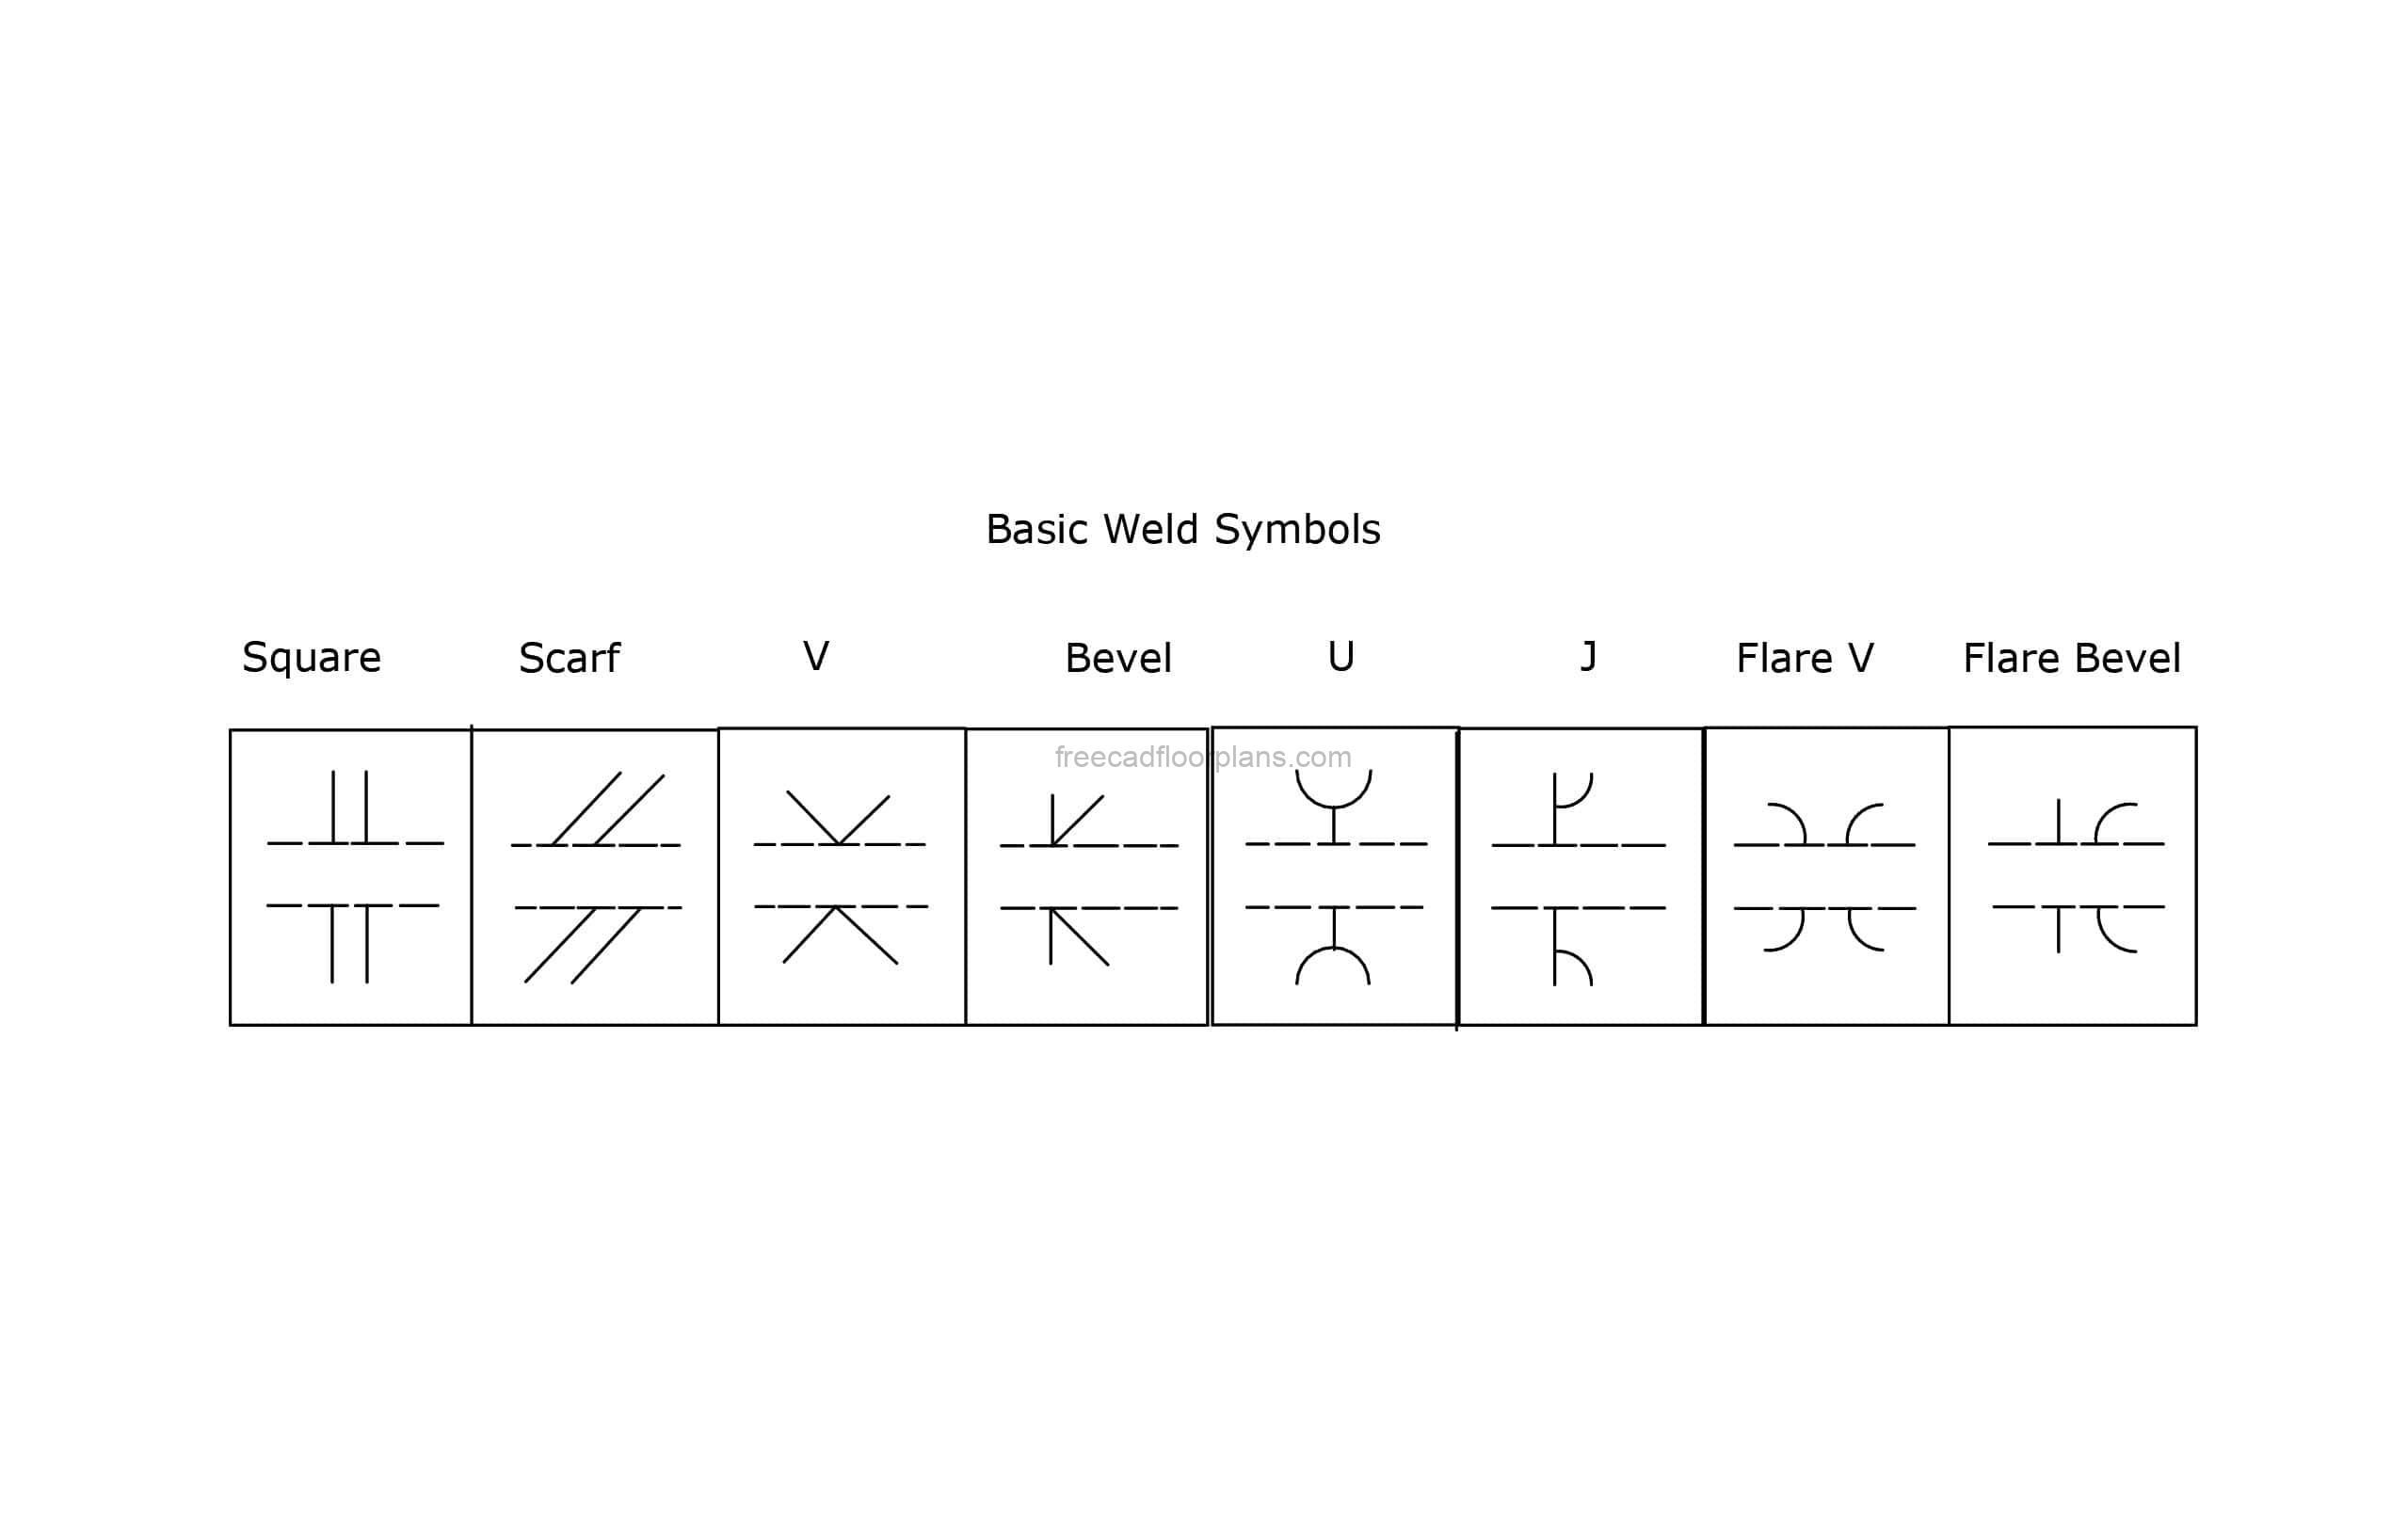 basic welding symbols drawing in dwg CAD model for free download